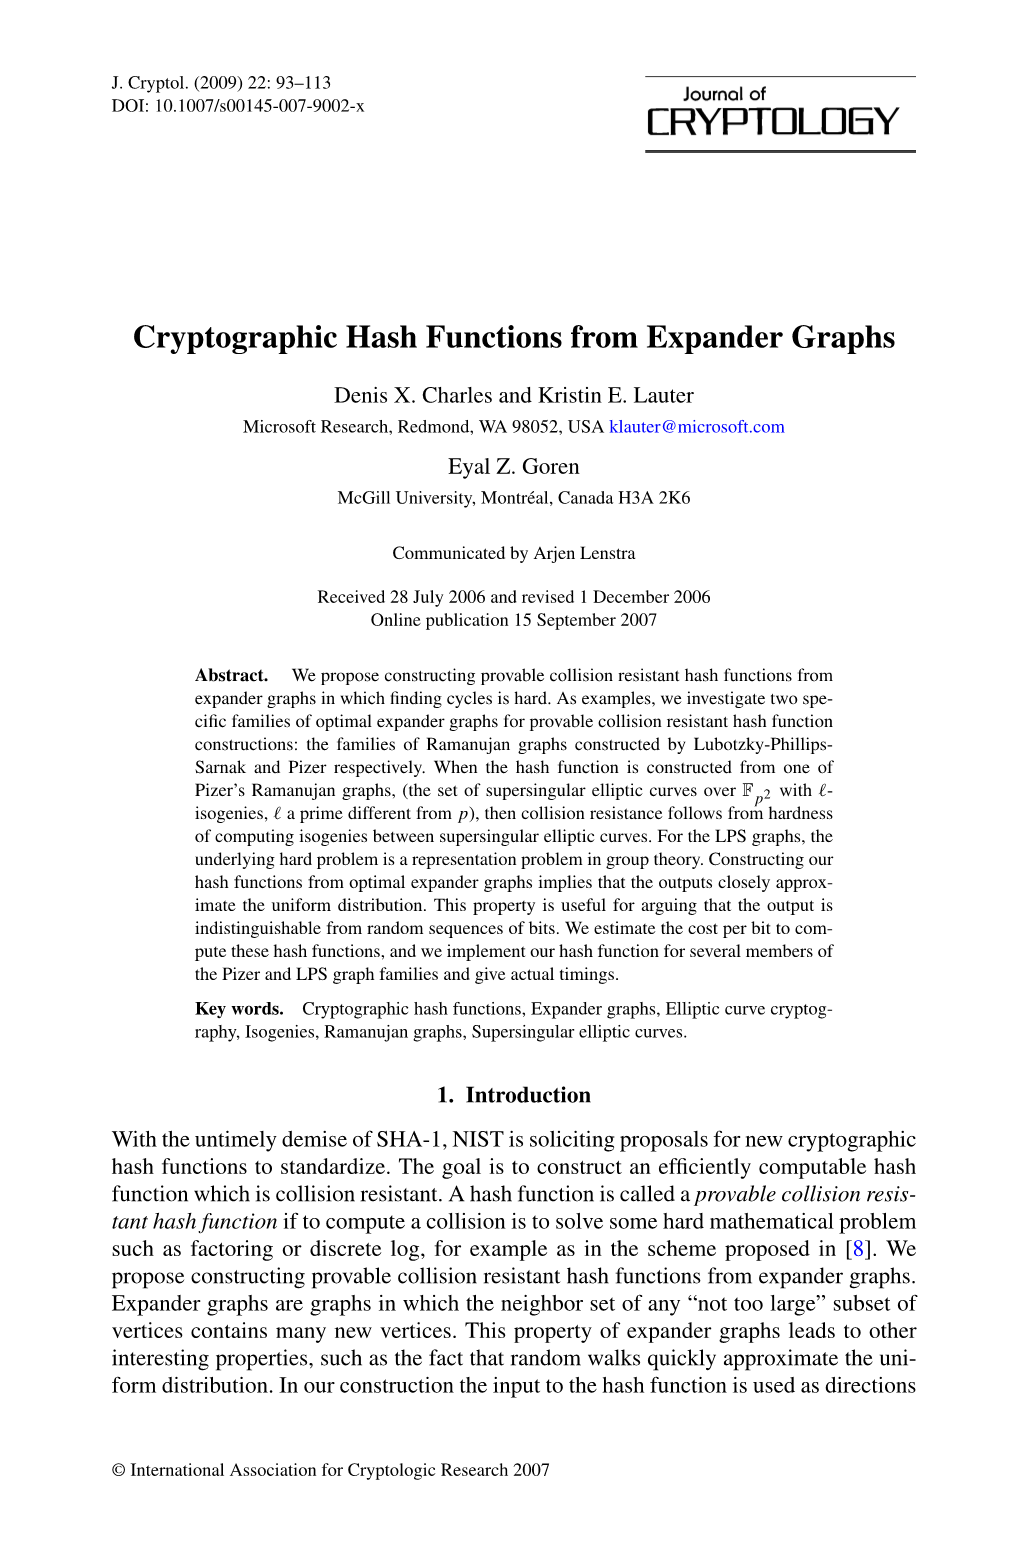 Cryptographic Hash Functions from Expander Graphs